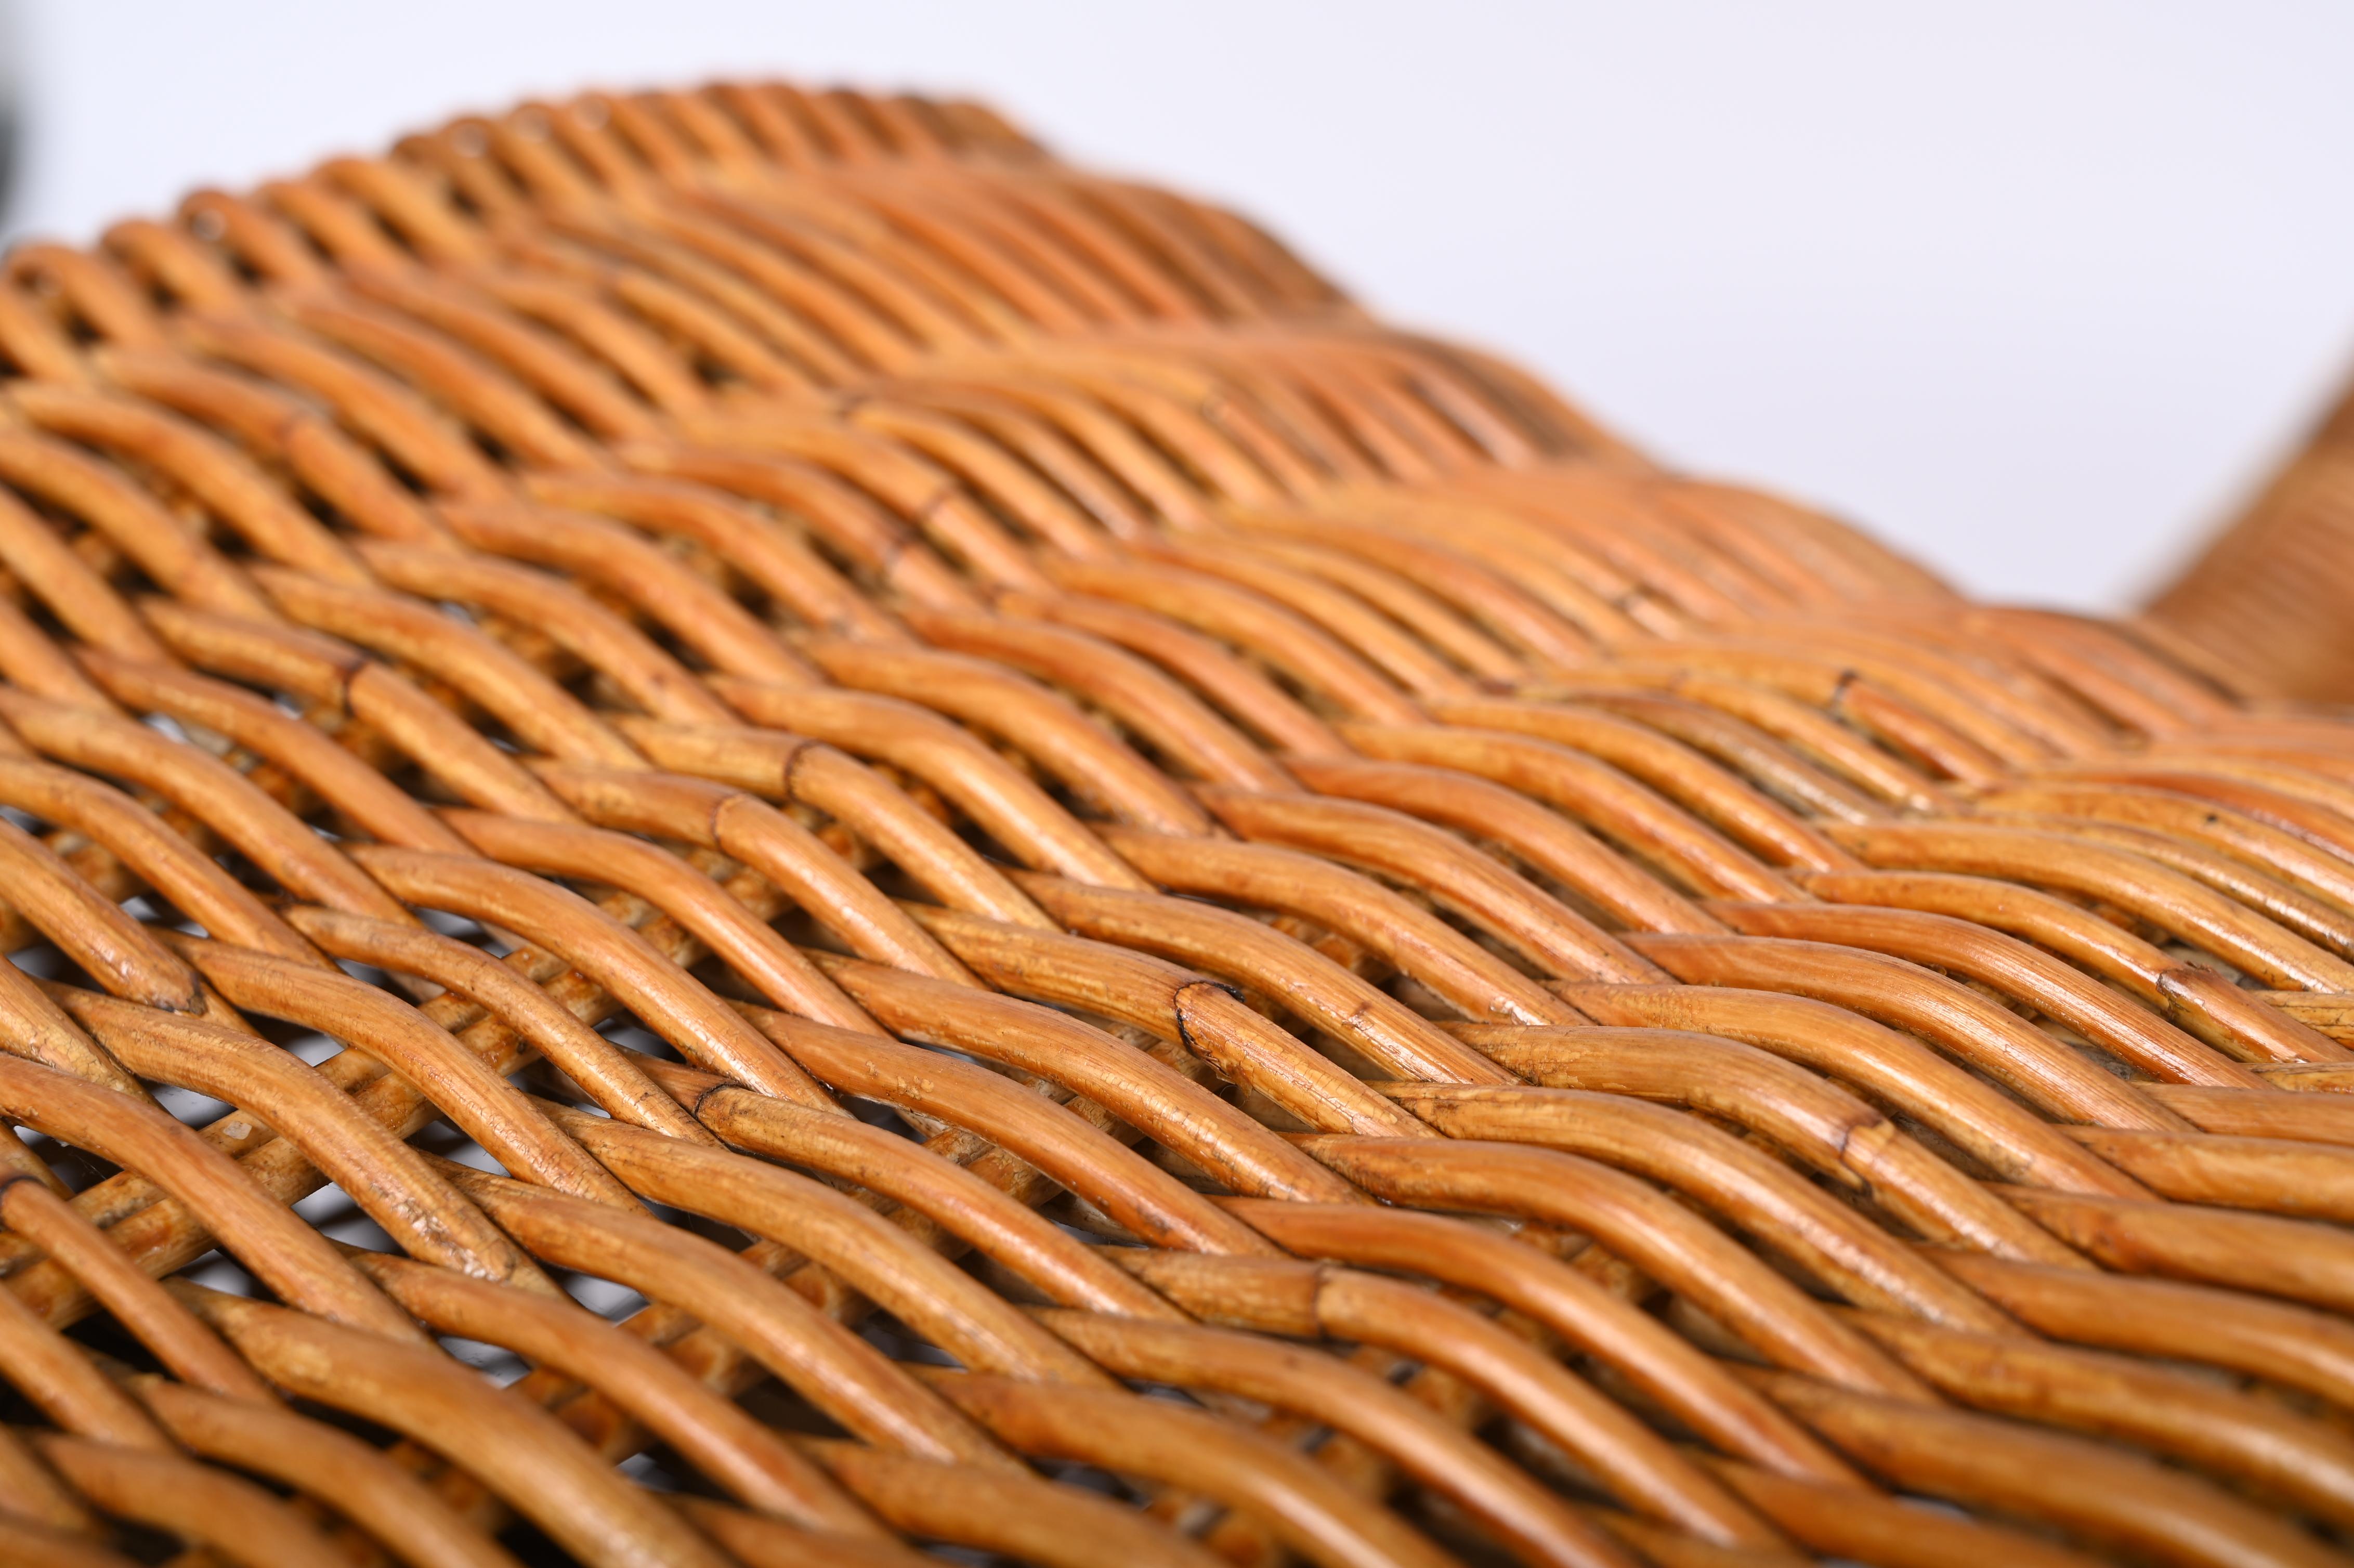 Midcentury Modern Bamboo and Wicker Italian Chaise Longue, 1960s For Sale 11